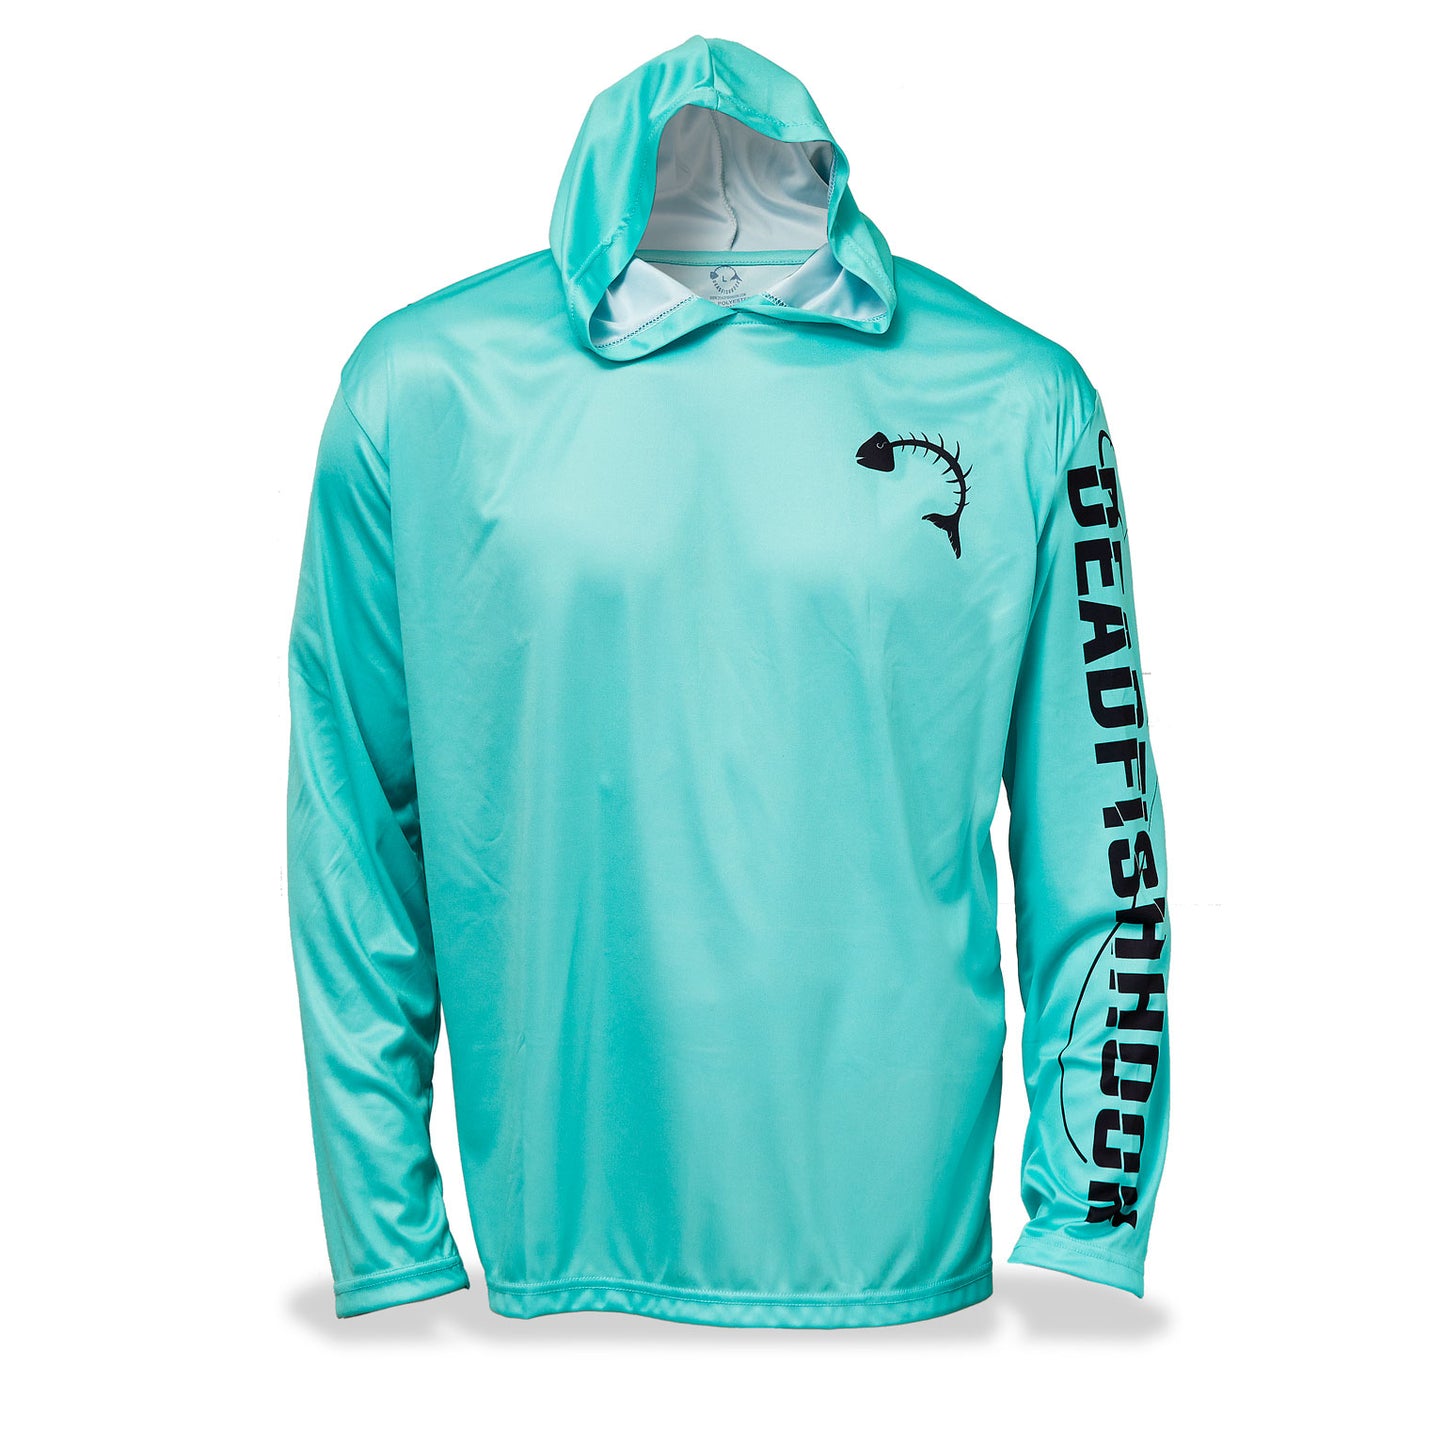 Dead Fish Hook long sleeve performance fishing shirt in turquoise with school of fish print on back - front view